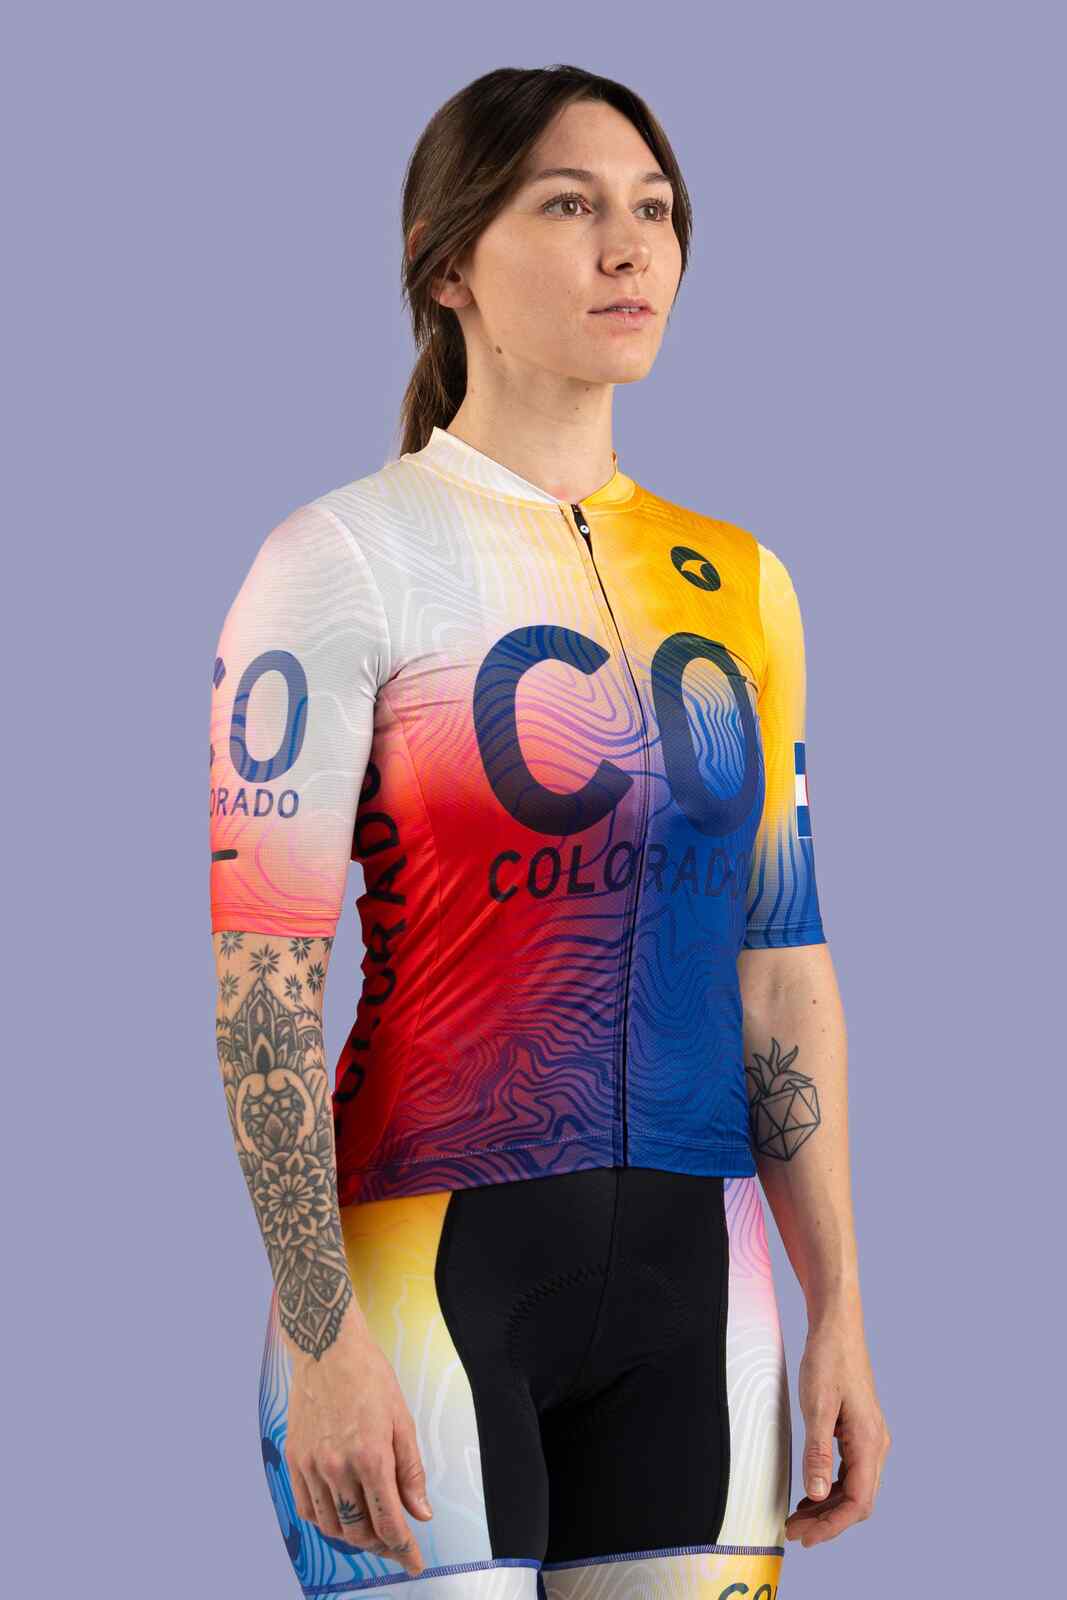 Women's Colorado Flag Cycling Jersey - Ascent Aero Front View